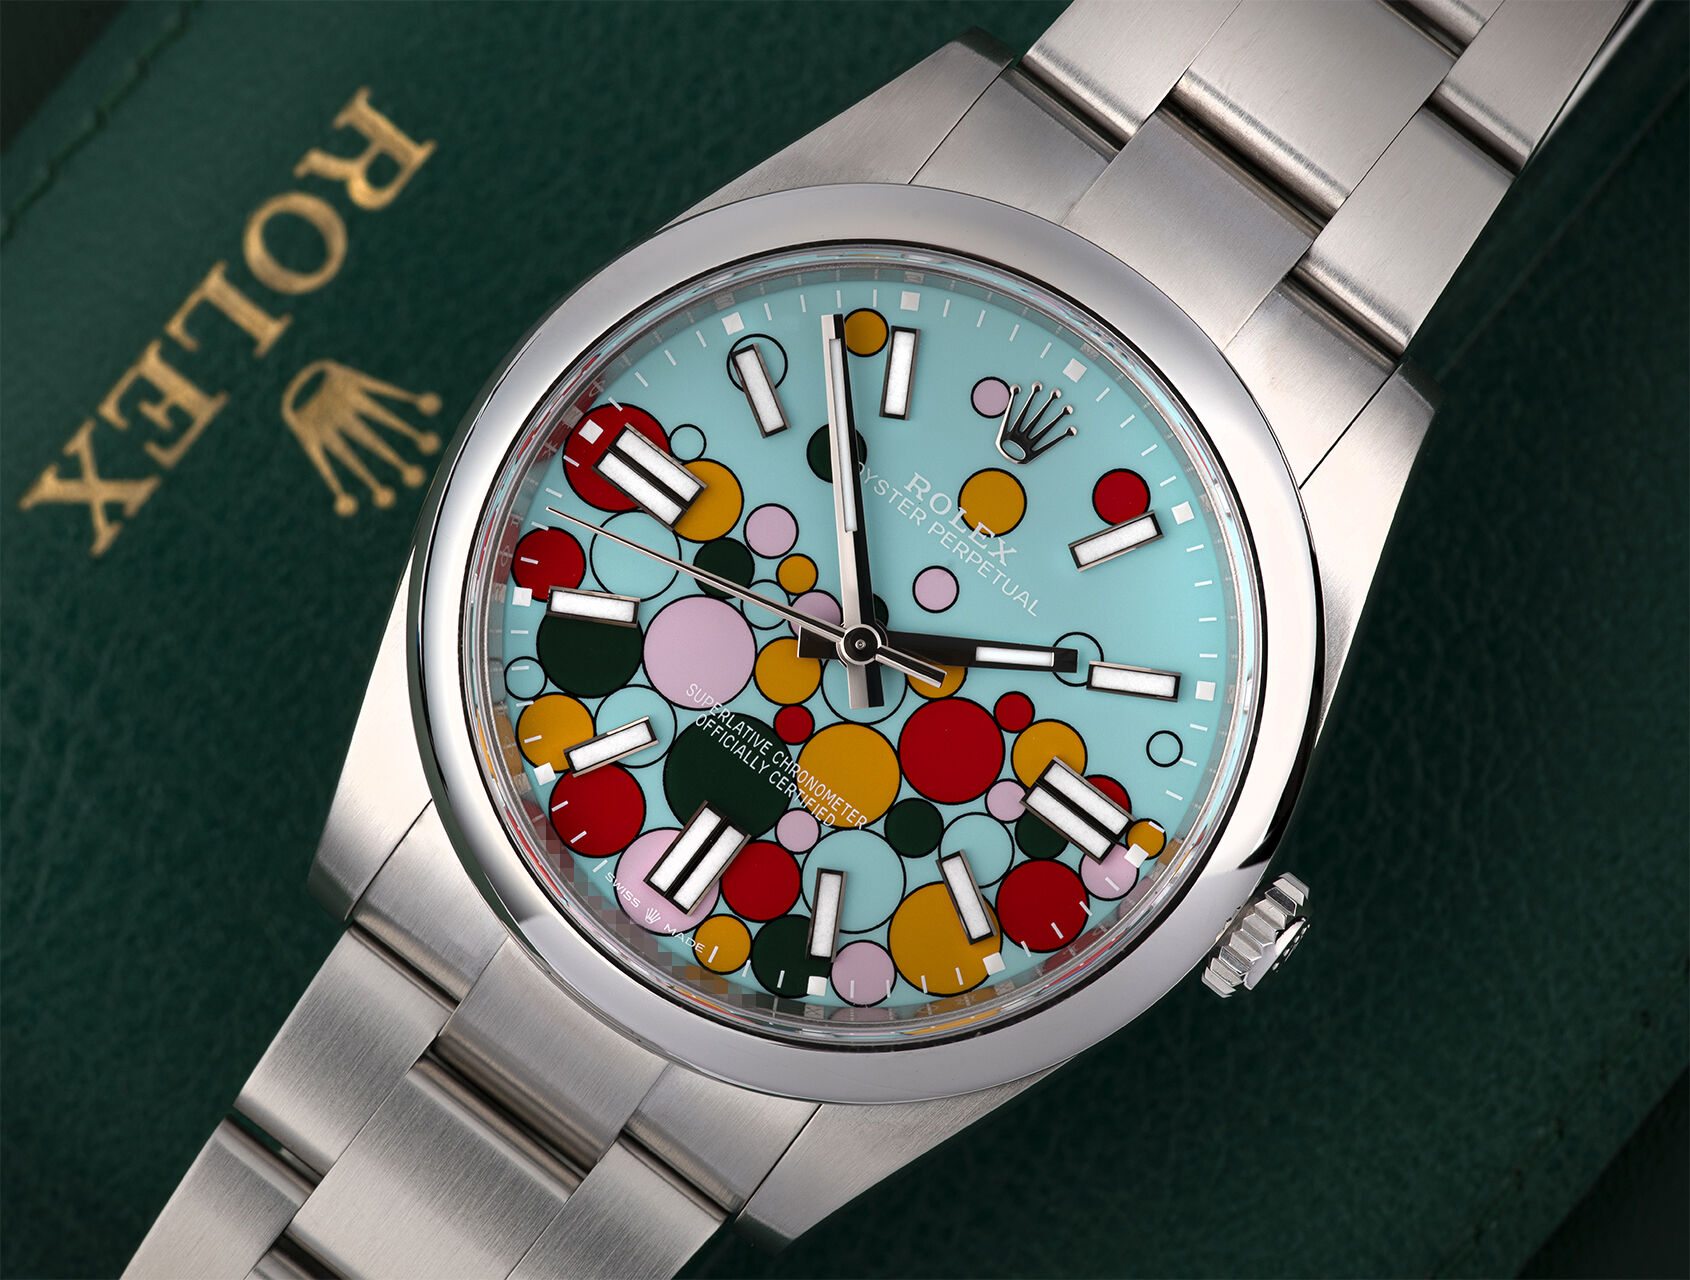 ref 124300 | 124300 - Celebration Dial | Rolex Oyster Perpetual